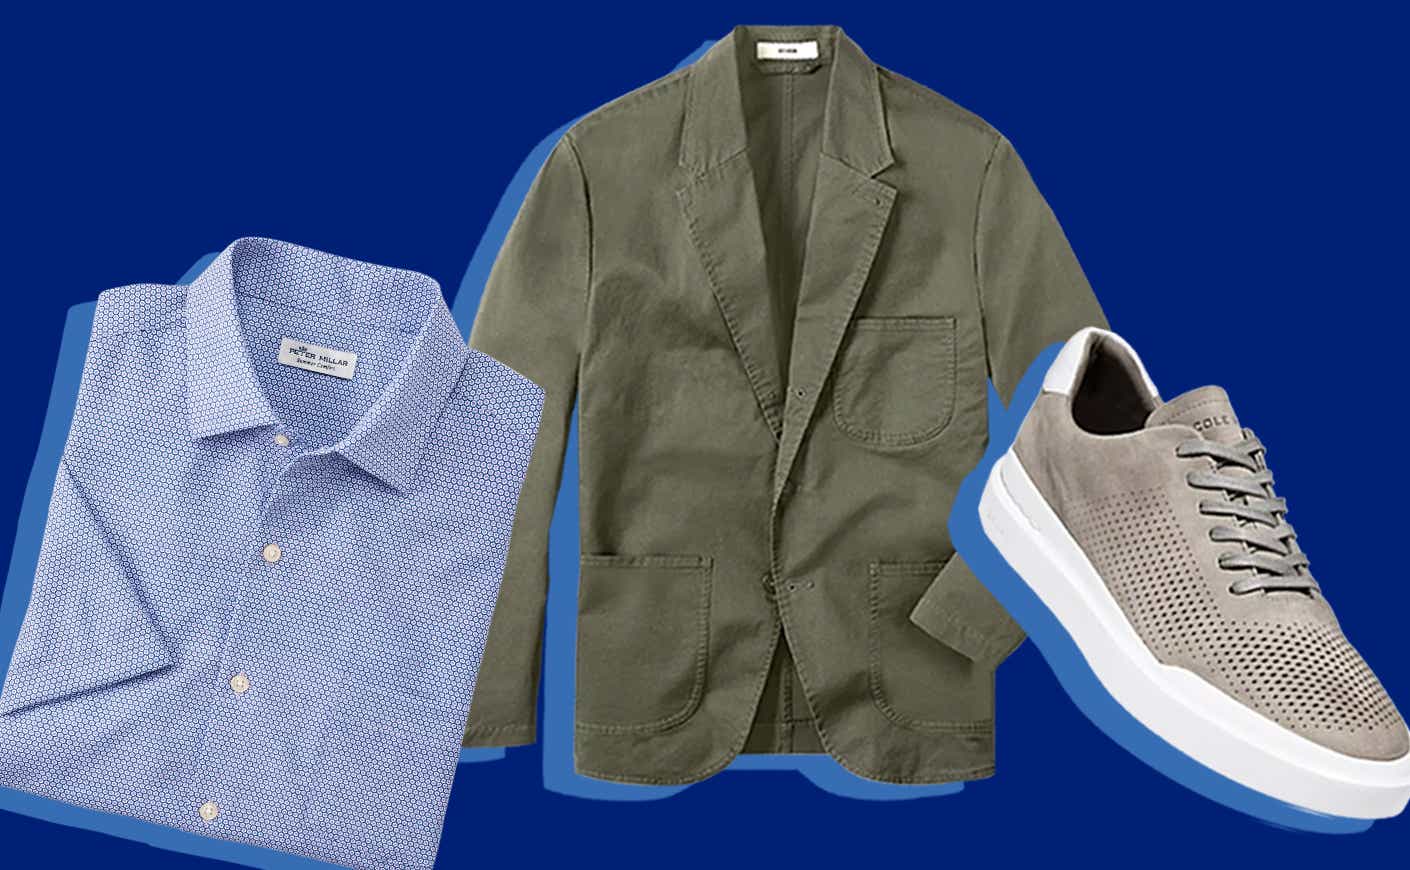 Comfortable Work Clothes for Men to Give Working Dads on Fathers Day